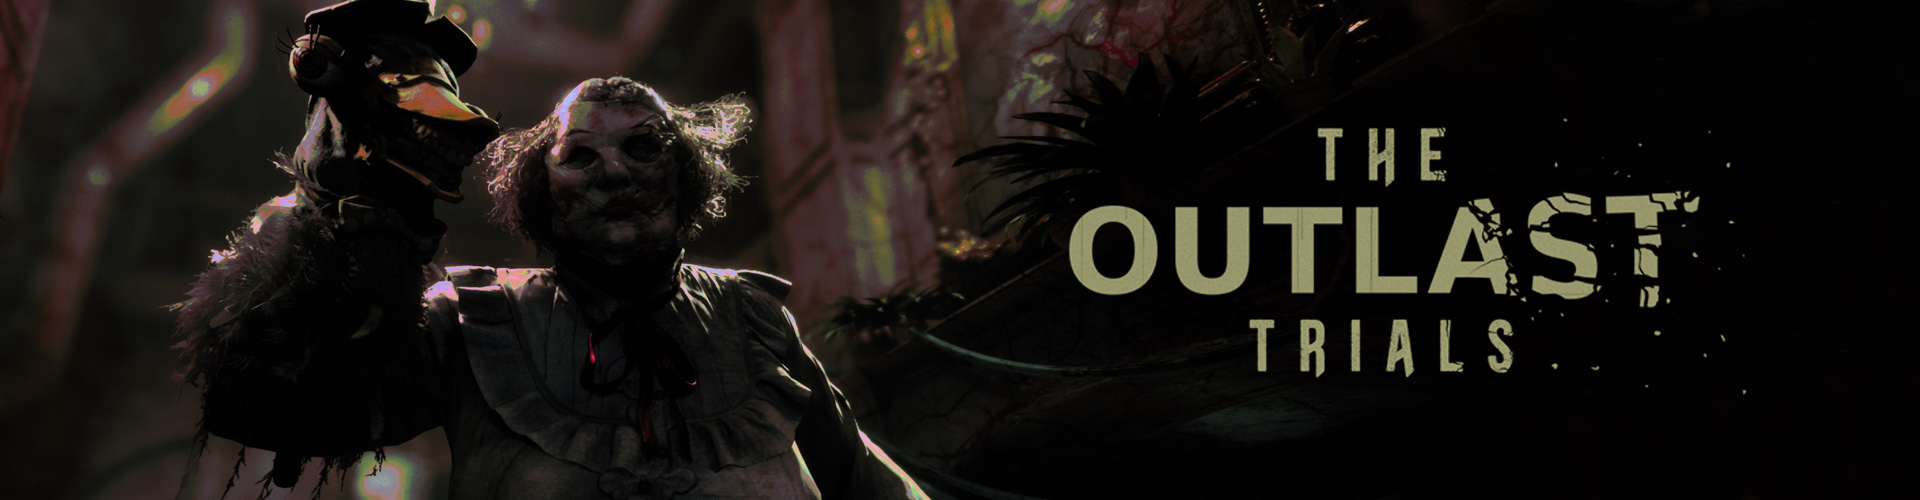 The Outlast Trials: a co-op psychological horror game